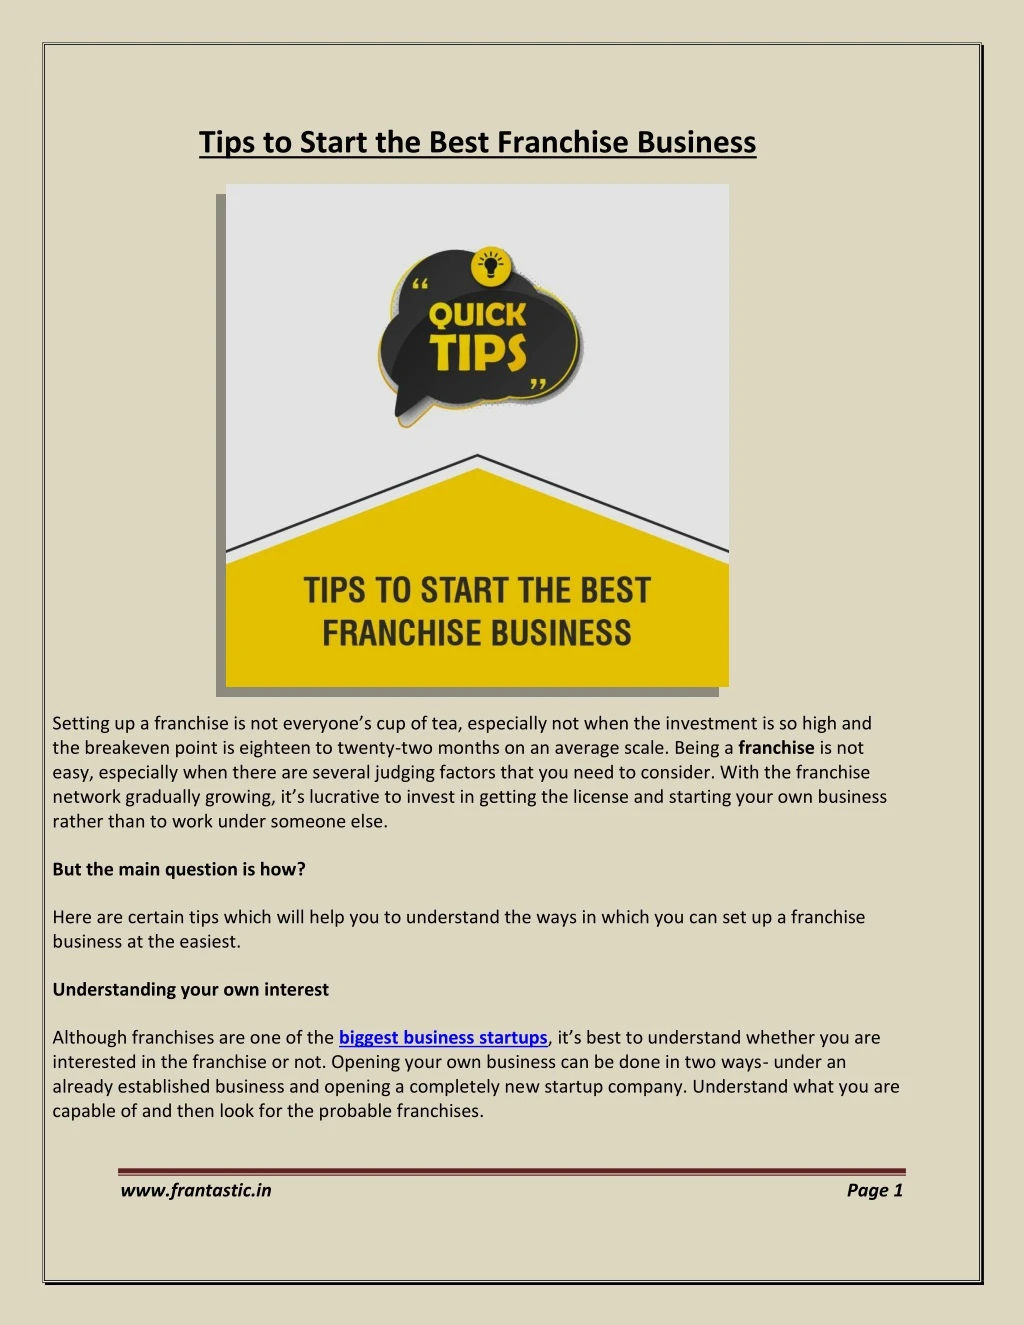 tips to start the best franchise business